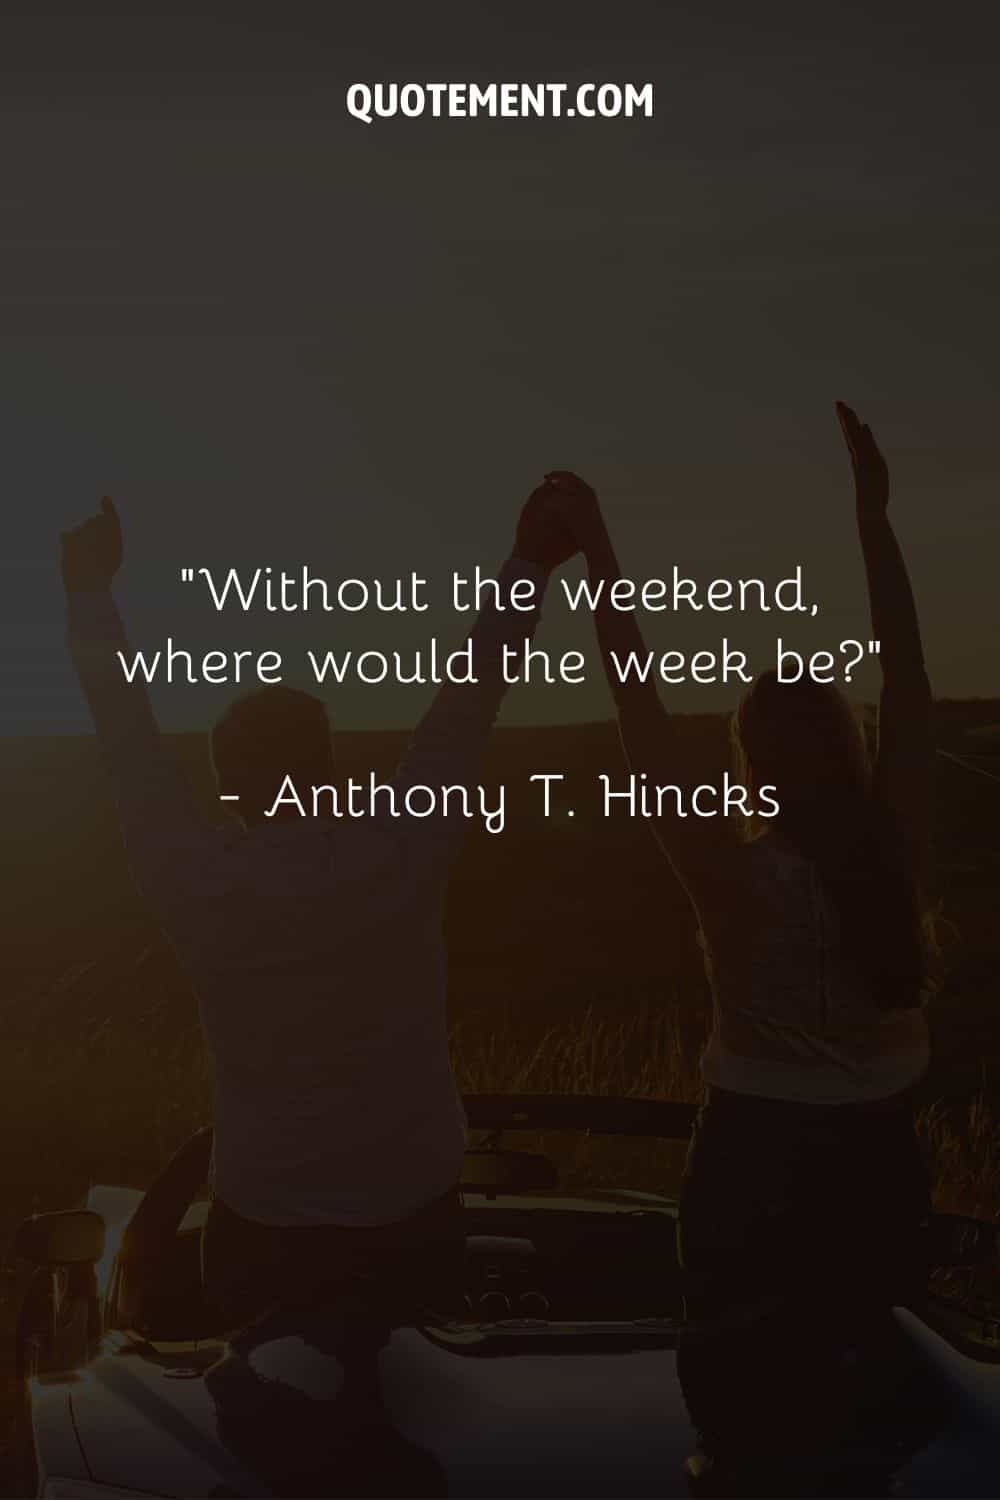 Without the weekend, where would the week be